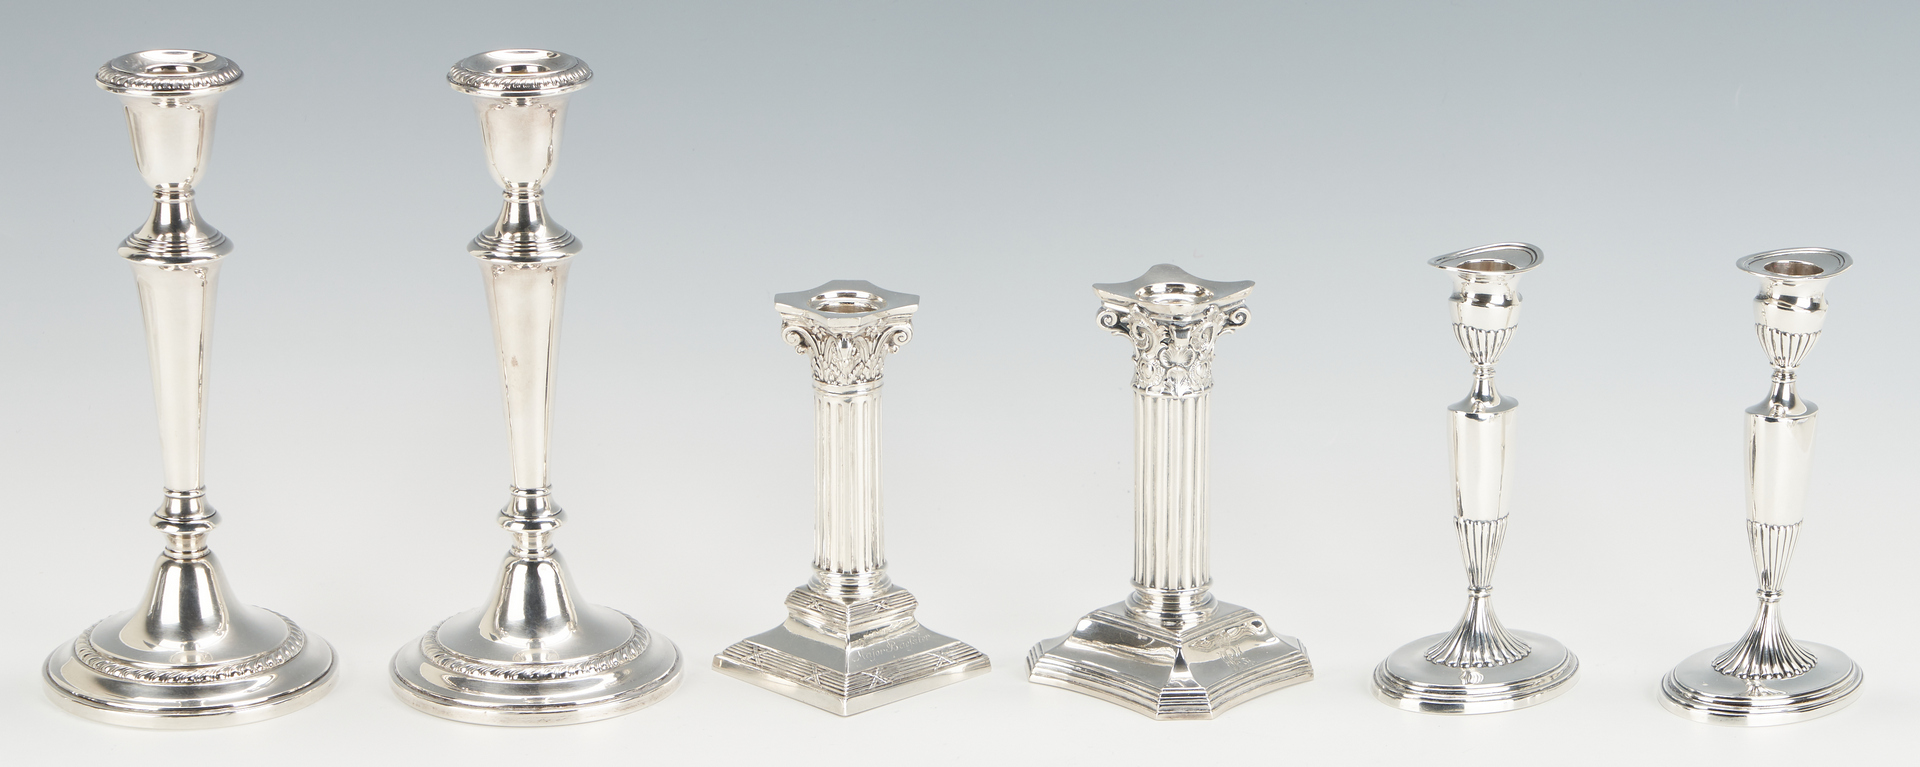 Lot 1153: 6 Silver Candlesticks plus 16 pcs. Continental Silver, Total 22 Items